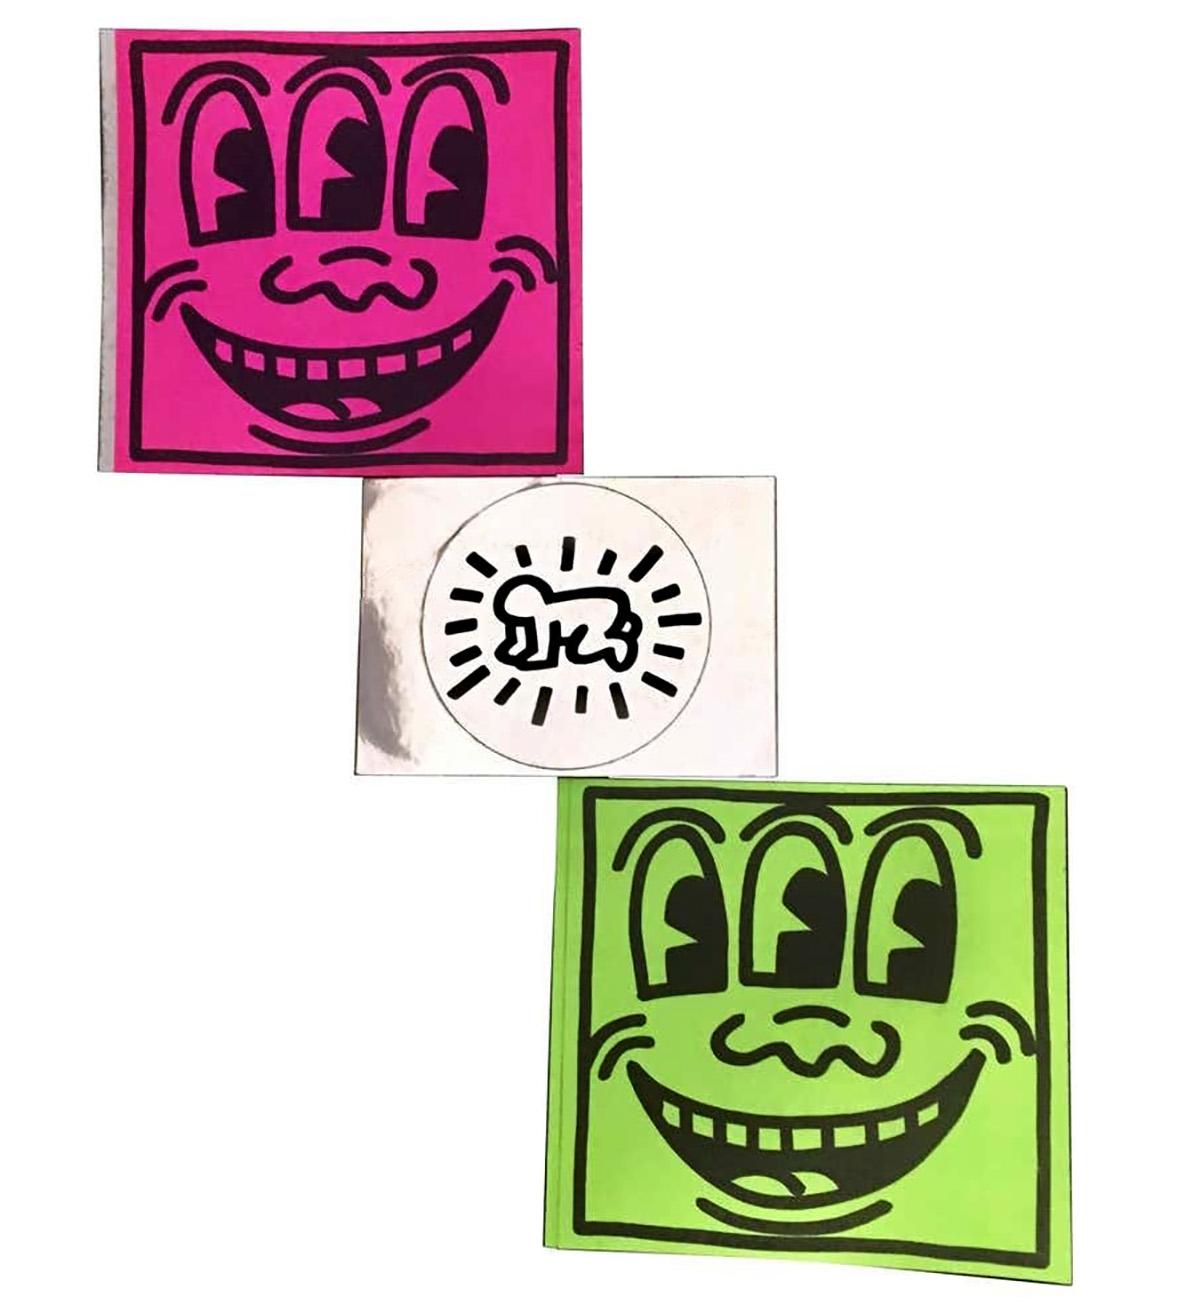 Keith Haring Crawling Baby & Three Eyed Smiling Face stickers circa early/ mid 80s.

Originally produced by Haring for his first solo gallery exhibition in 1982, then later sold/given out at Haring's New York Pop Shop throughout the 1980s. Iconic